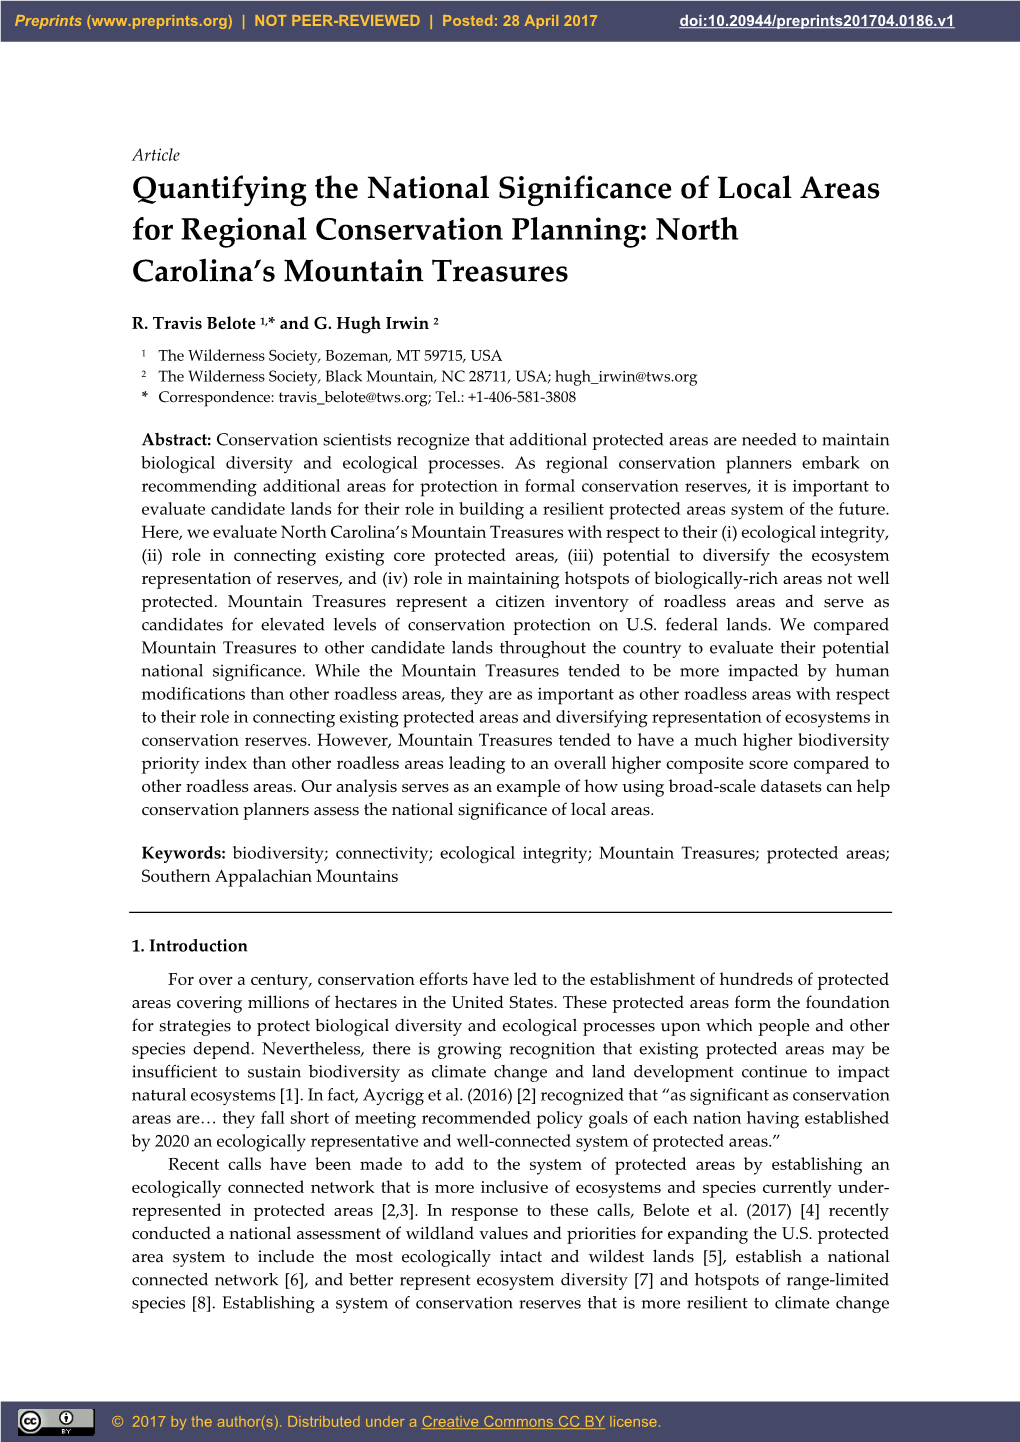 Quantifying the National Significance of Local Areas for Regional Conservation Planning: North Carolina’S Mountain Treasures